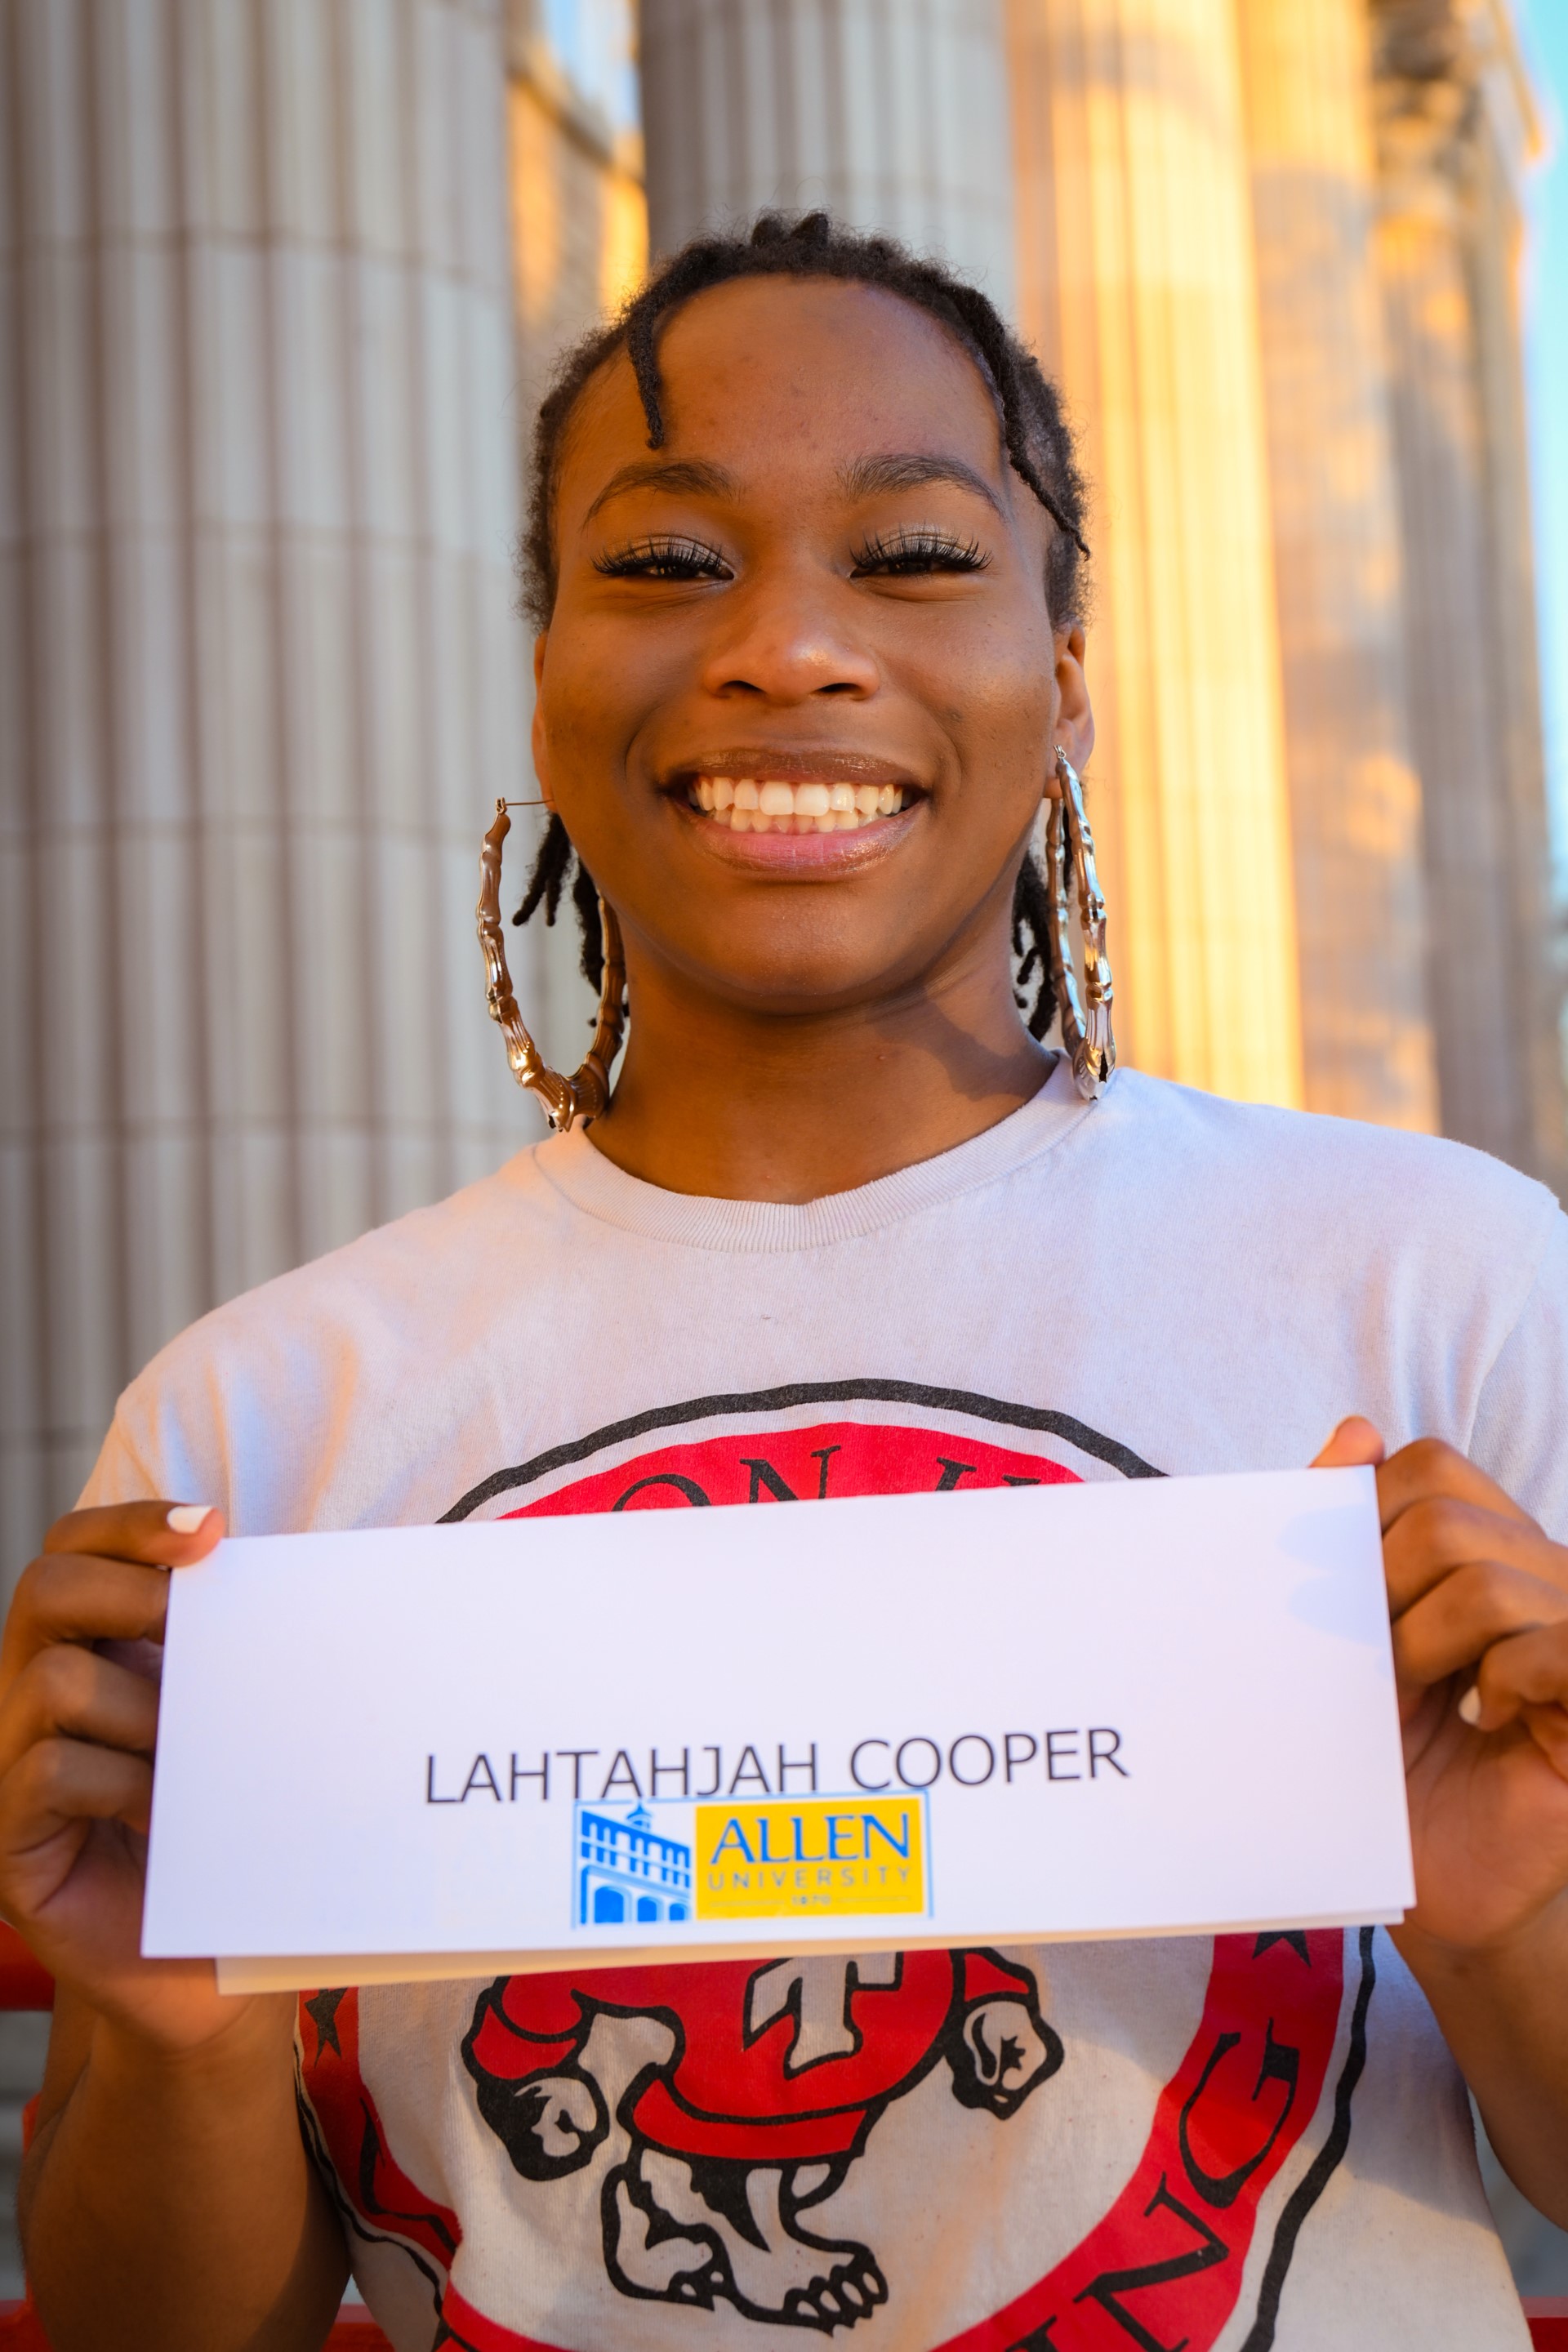 Lahtahjah Cooper smiles with her nametag showing she's signing to Allen University